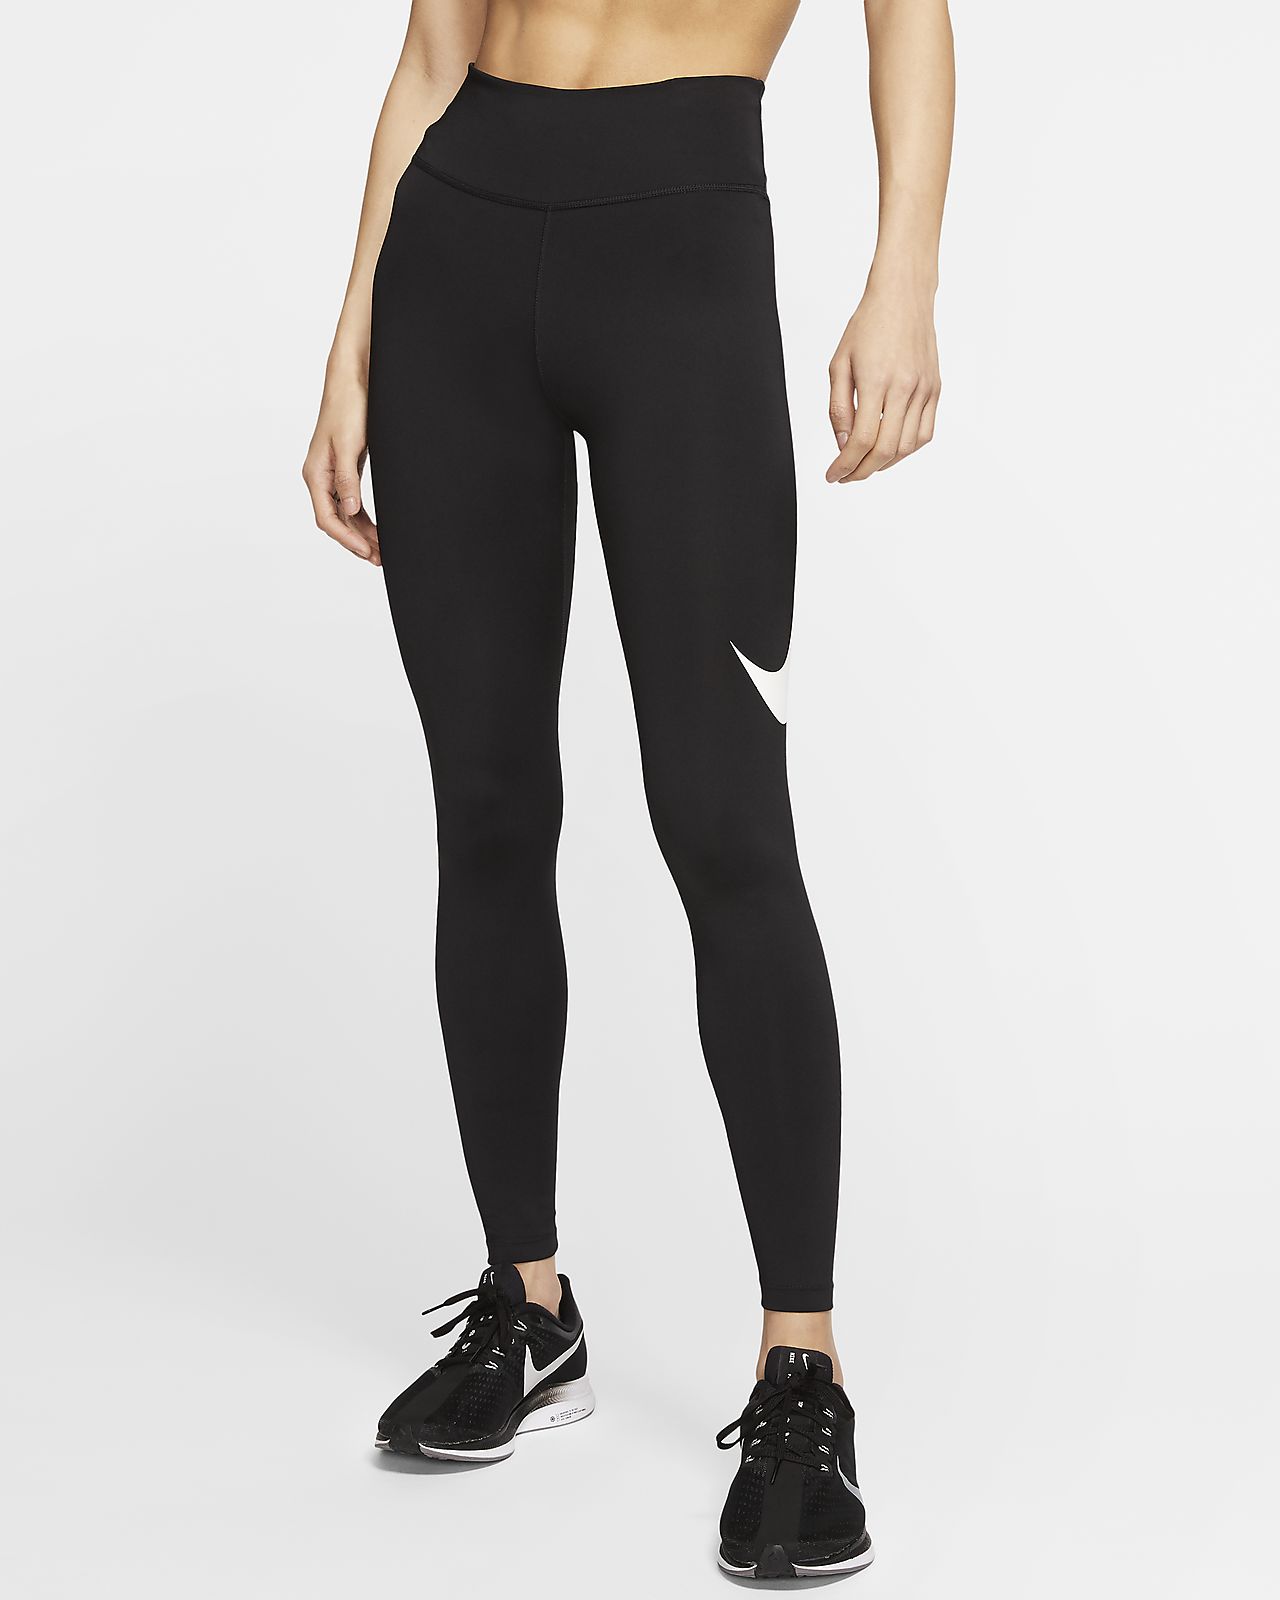 nike pro tights nz \u003e Up to 69% OFF 